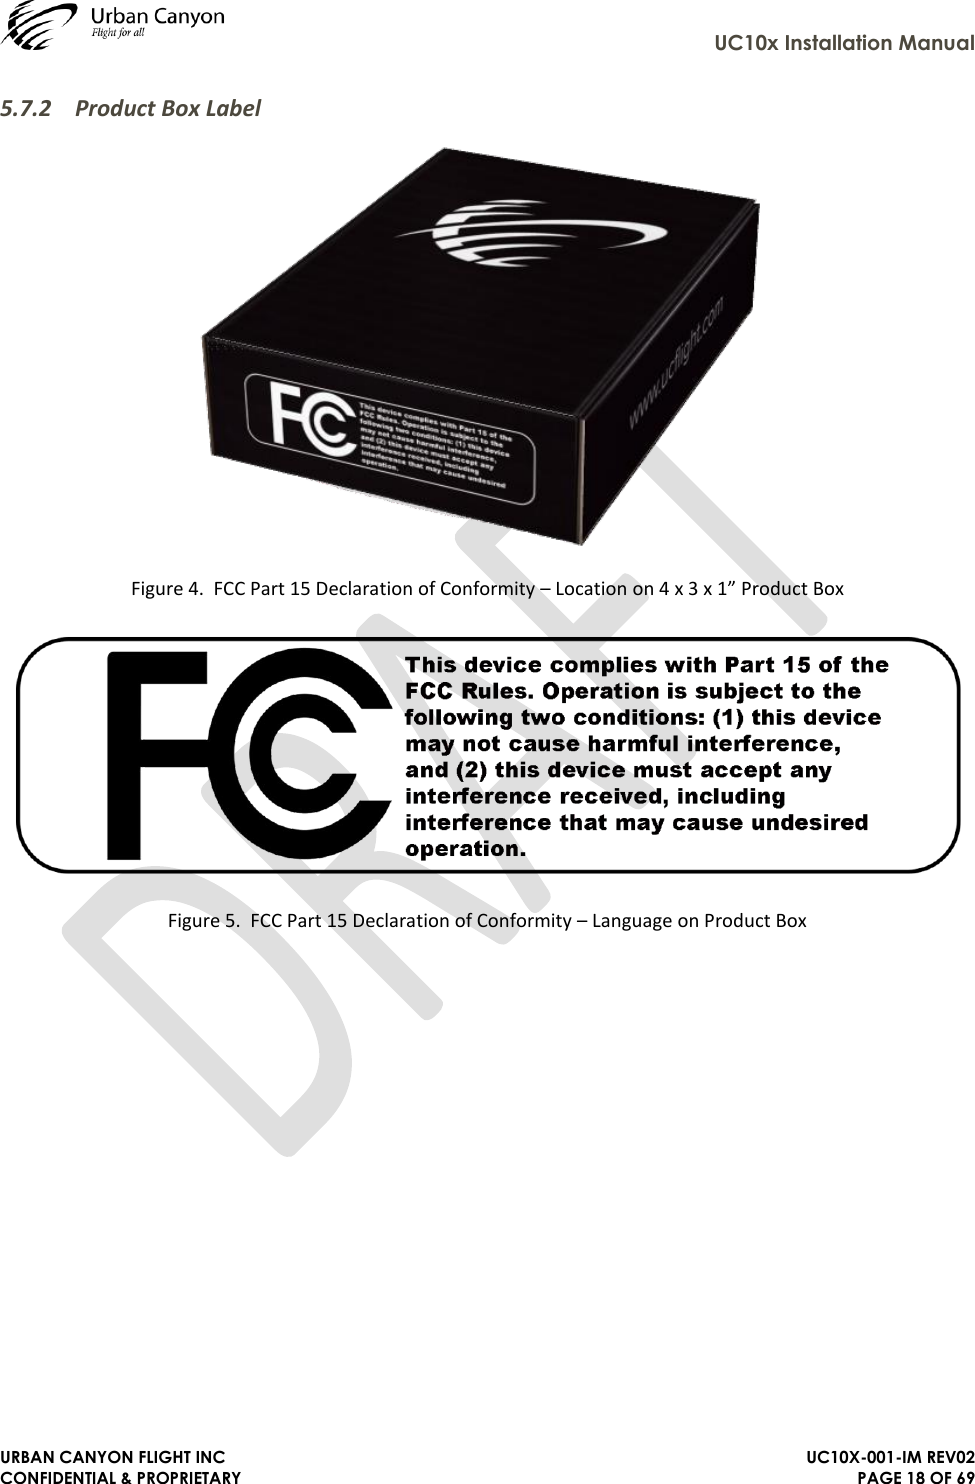     UC10x Installation Manual  URBAN CANYON FLIGHT INC   UC10X-001-IM REV02 CONFIDENTIAL &amp; PROPRIETARY PAGE 18 OF 69 5.7.2 Product Box Label  Figure 4.  FCC Part 15 Declaration of Conformity – Location on 4 x 3 x 1” Product Box  Figure 5.  FCC Part 15 Declaration of Conformity – Language on Product Box  